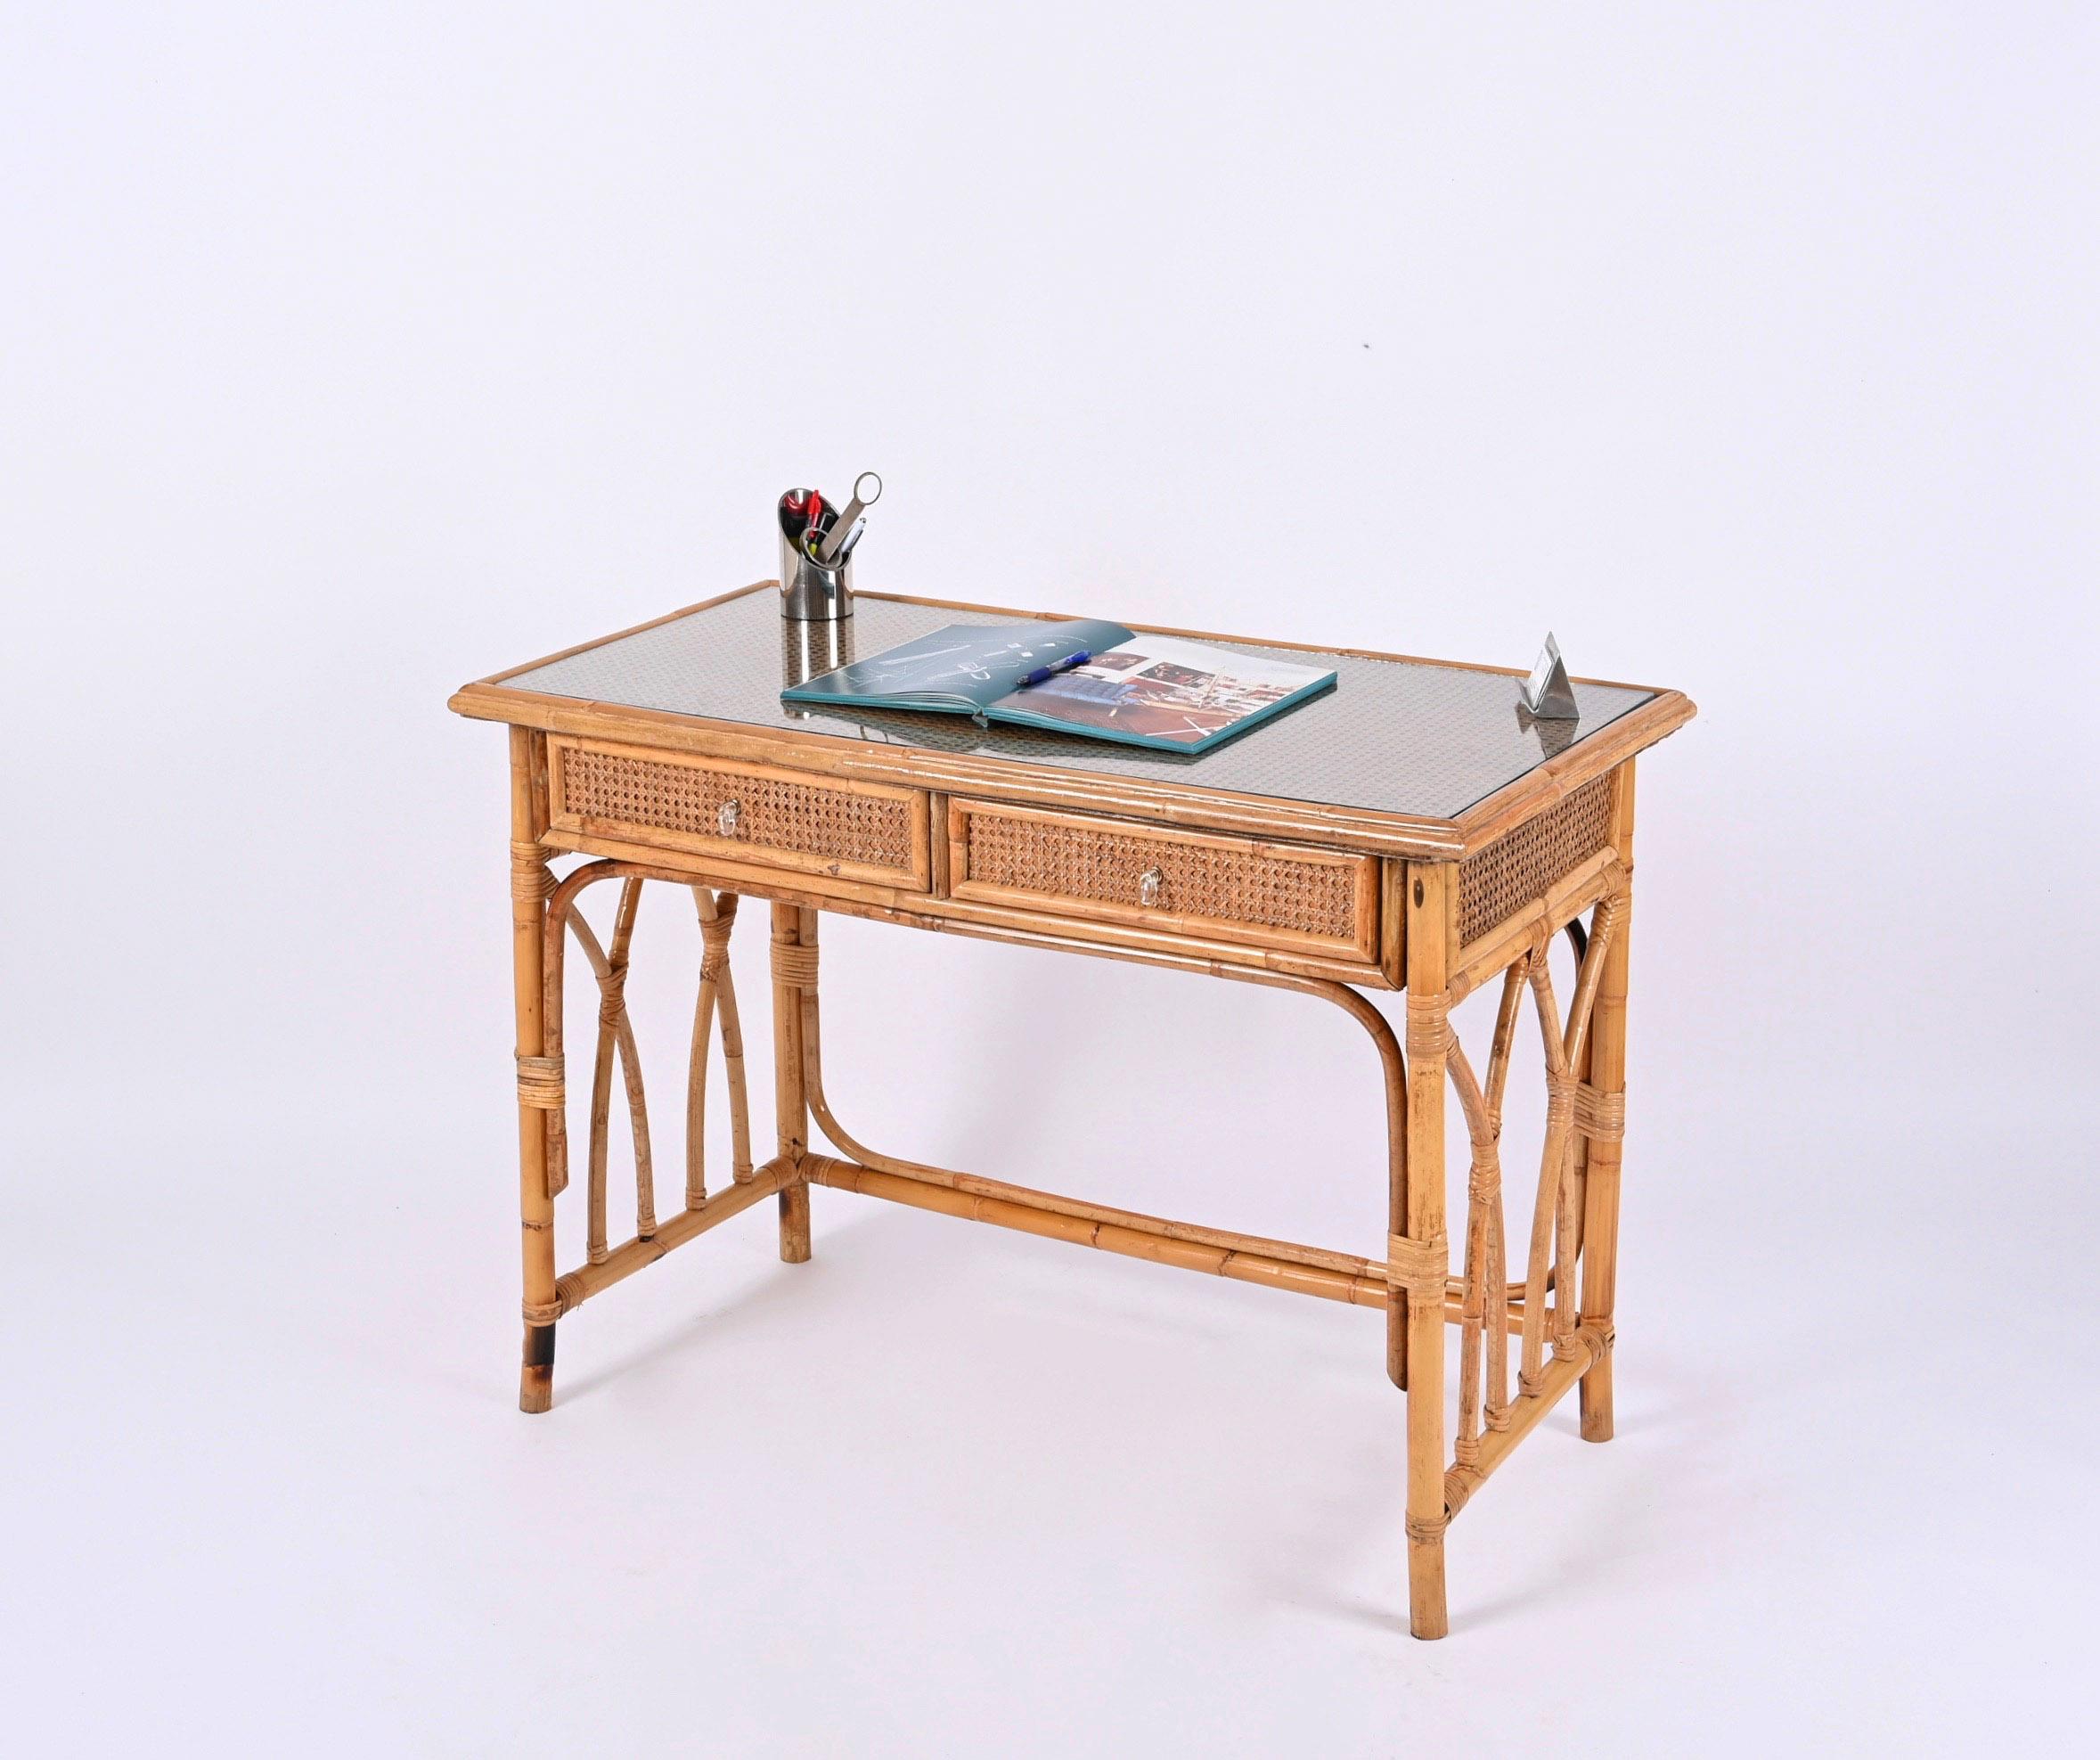 Fabulous mid-century desk in bamboo and Vienna straw wicker with crystal top. This unique piece was designed in Italy during the 1970s.

This outstanding desk features a structure in curved bamboo cane and rattan decorated on all the sides and on